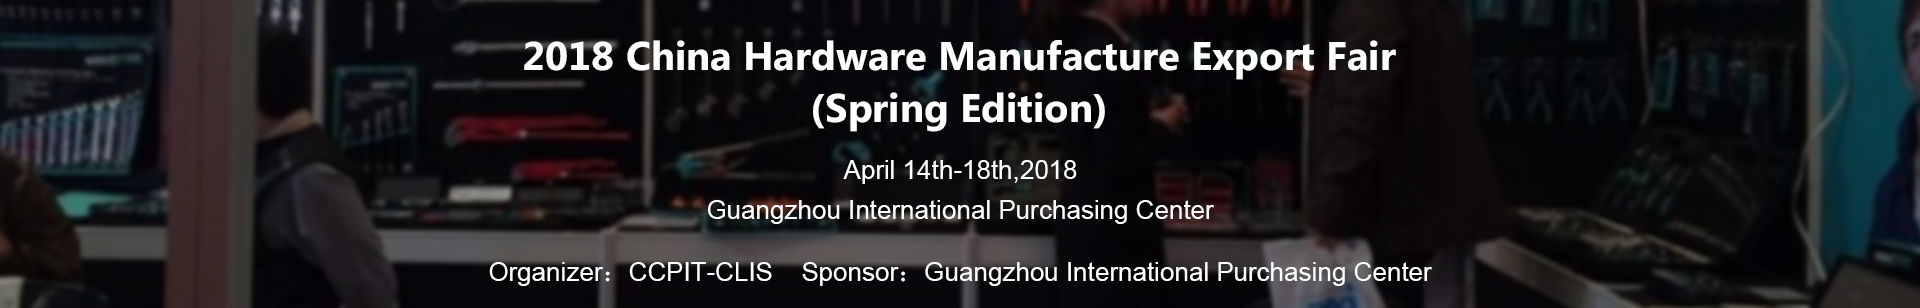 2018 China Hardware Manufacture Export Fair(Spring Edition)